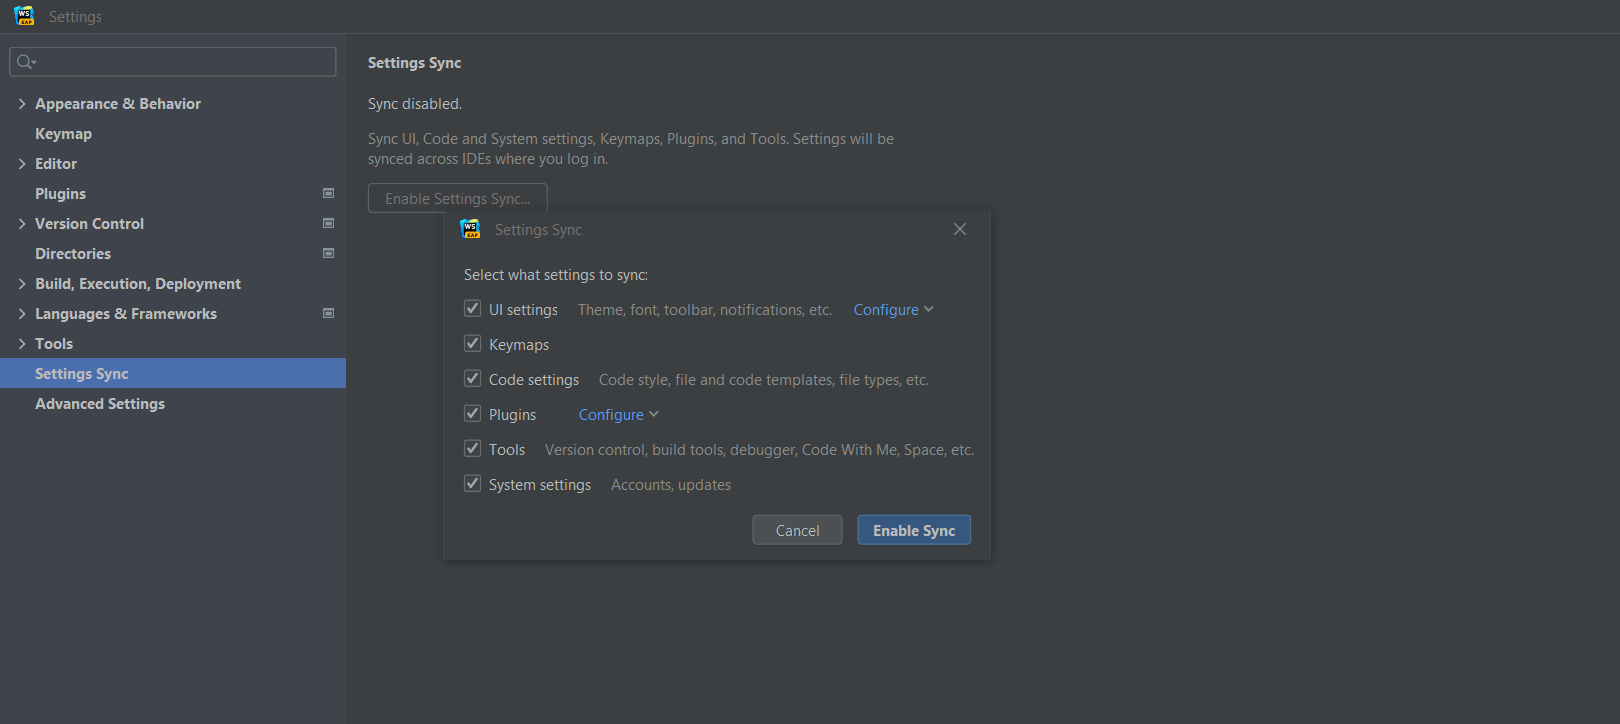 https://www.jetbrains.com/webstorm/whatsnew/img/2022.3/Reworked-settings-sync-810@2x.png